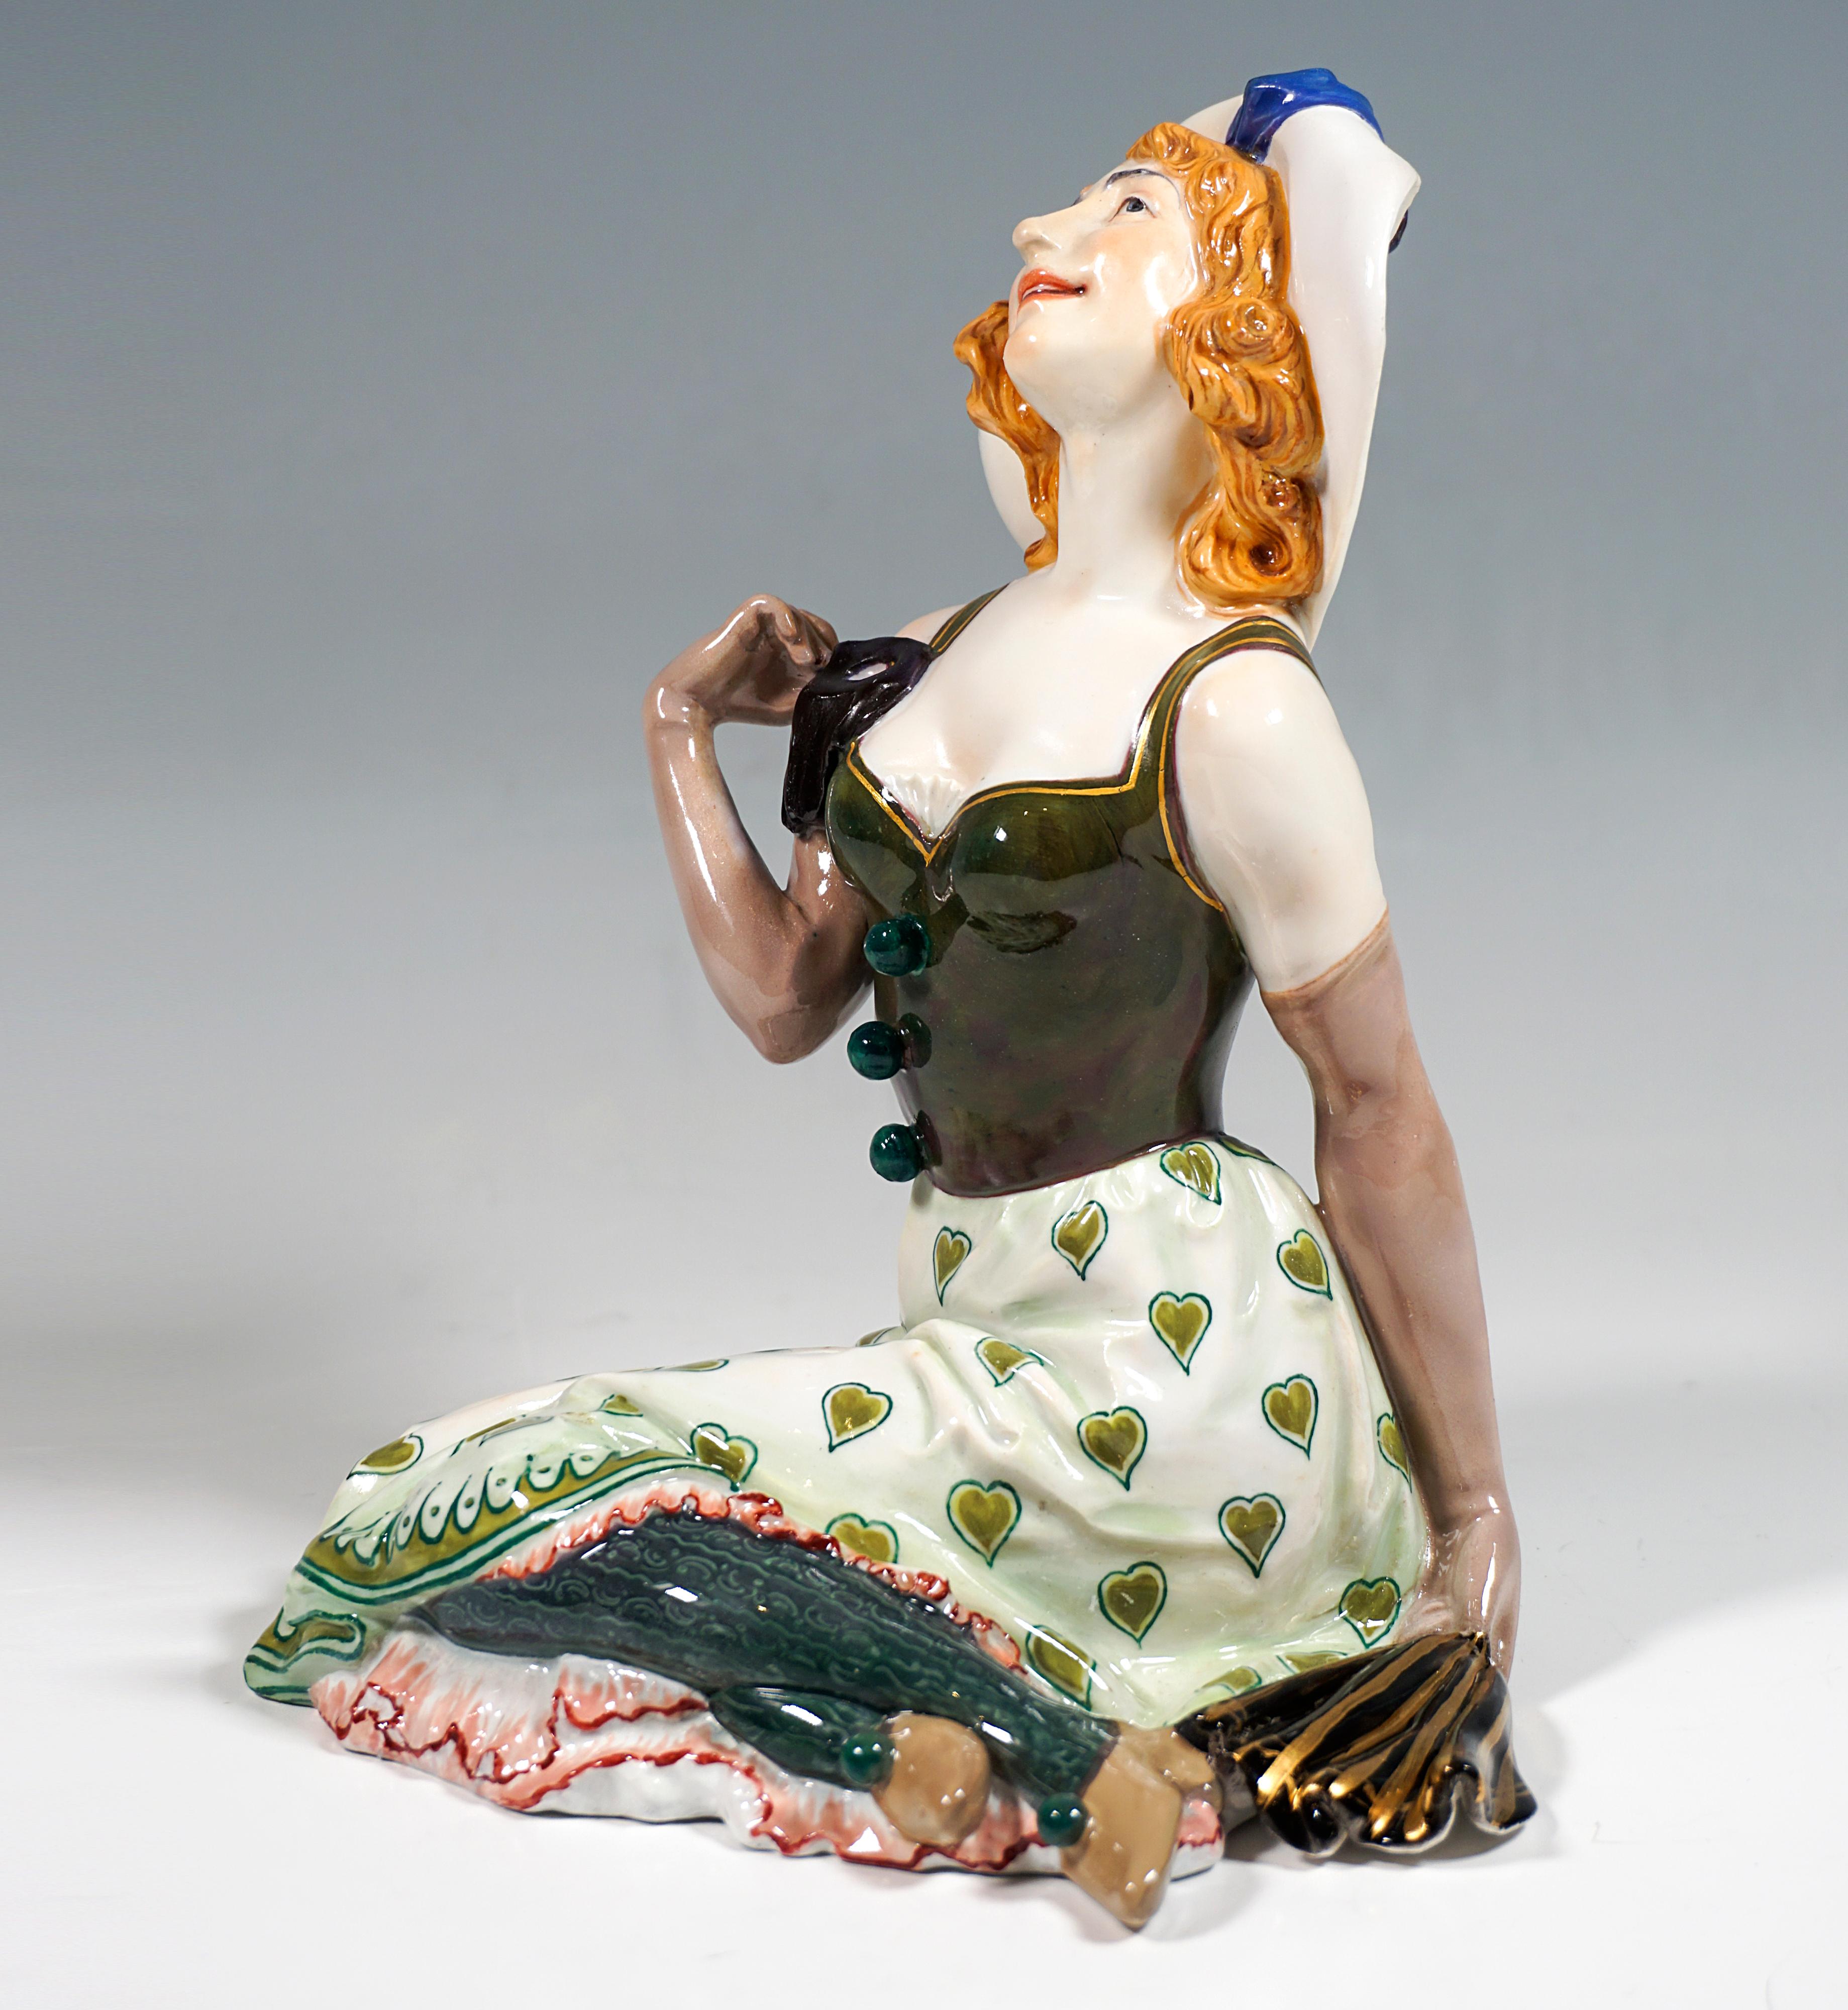 Extremely rare Meissen Art Nouveau porcelain figurine:
Red-haired girl sitting on the ground with big hat with brim turned up in front, dressed in green bodice with gold hem, wide skirt with green heart decoration and rosé petticoat, green woolen